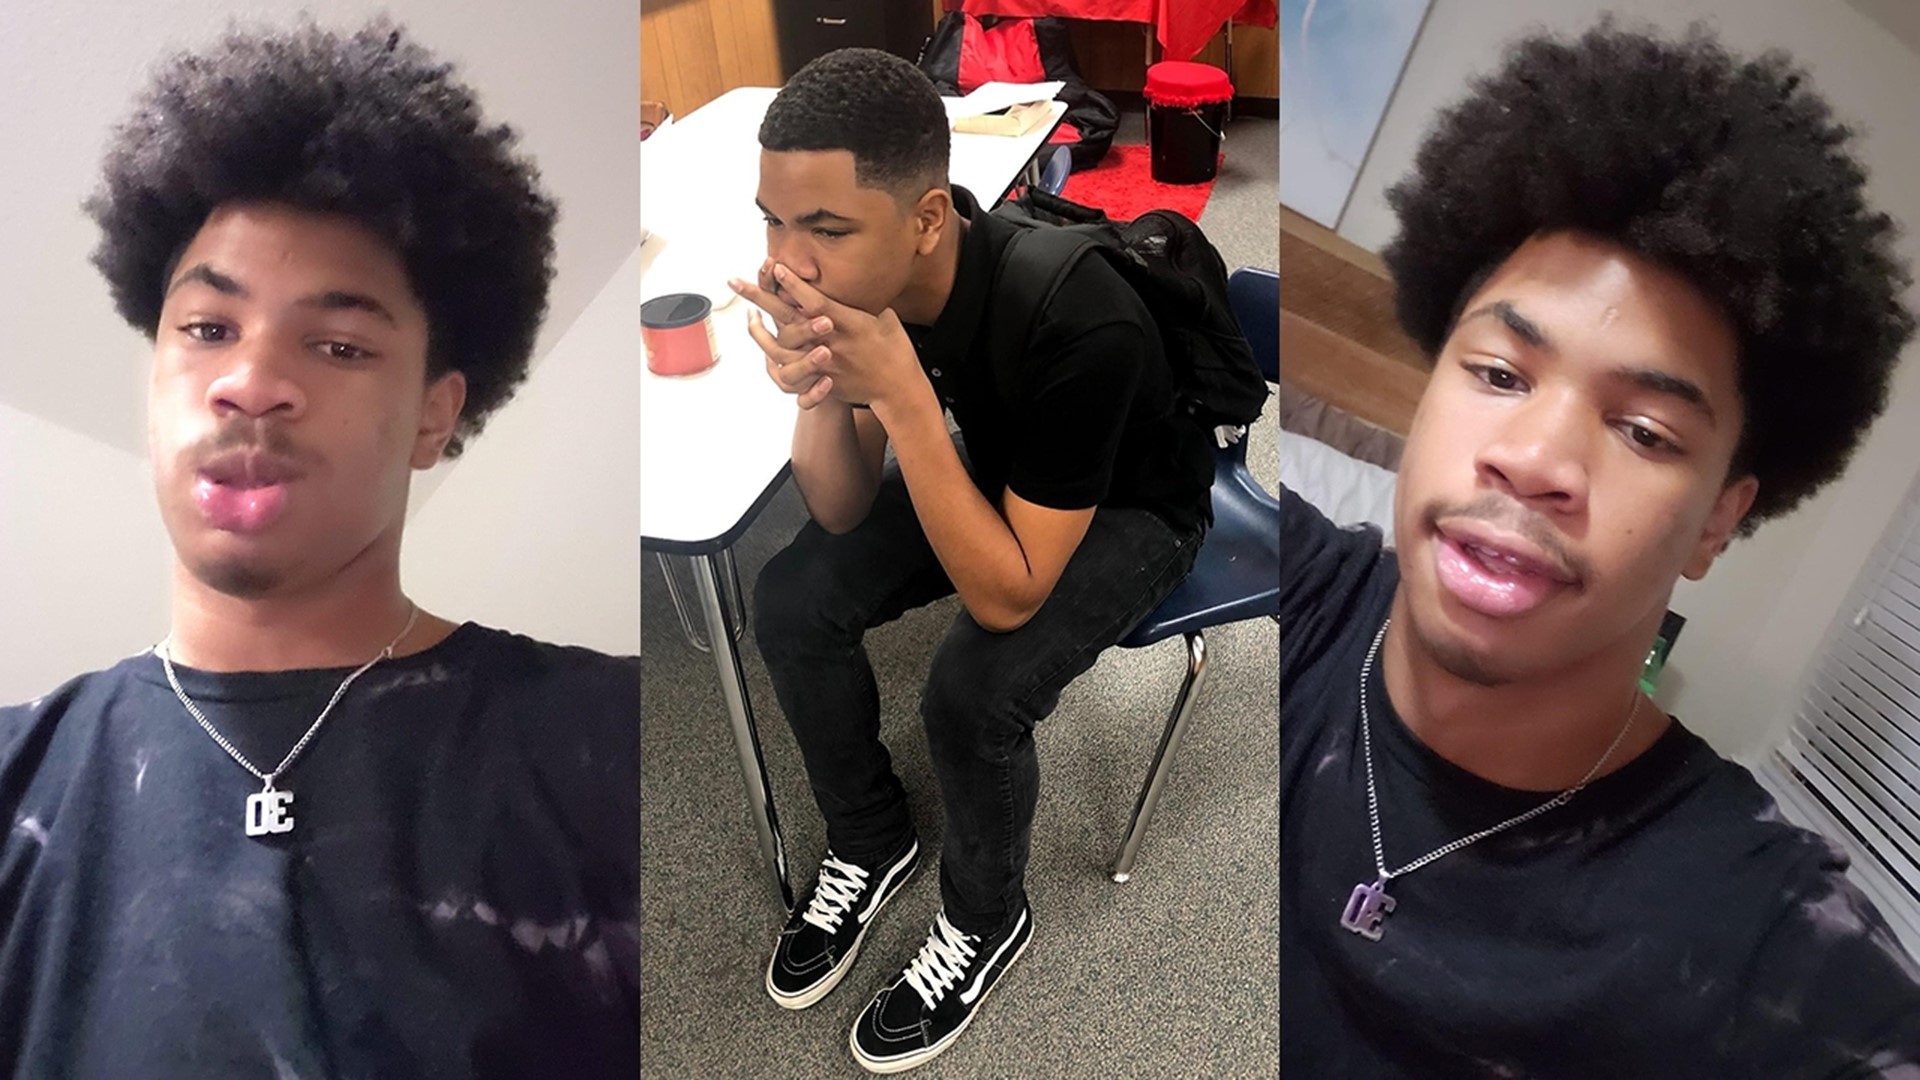 Zion Lampley, 16, was shot at a shopping center on Imperial Valley Drive near the intersection of I-45 and FM 1960. The incident was caught on surveillance video.